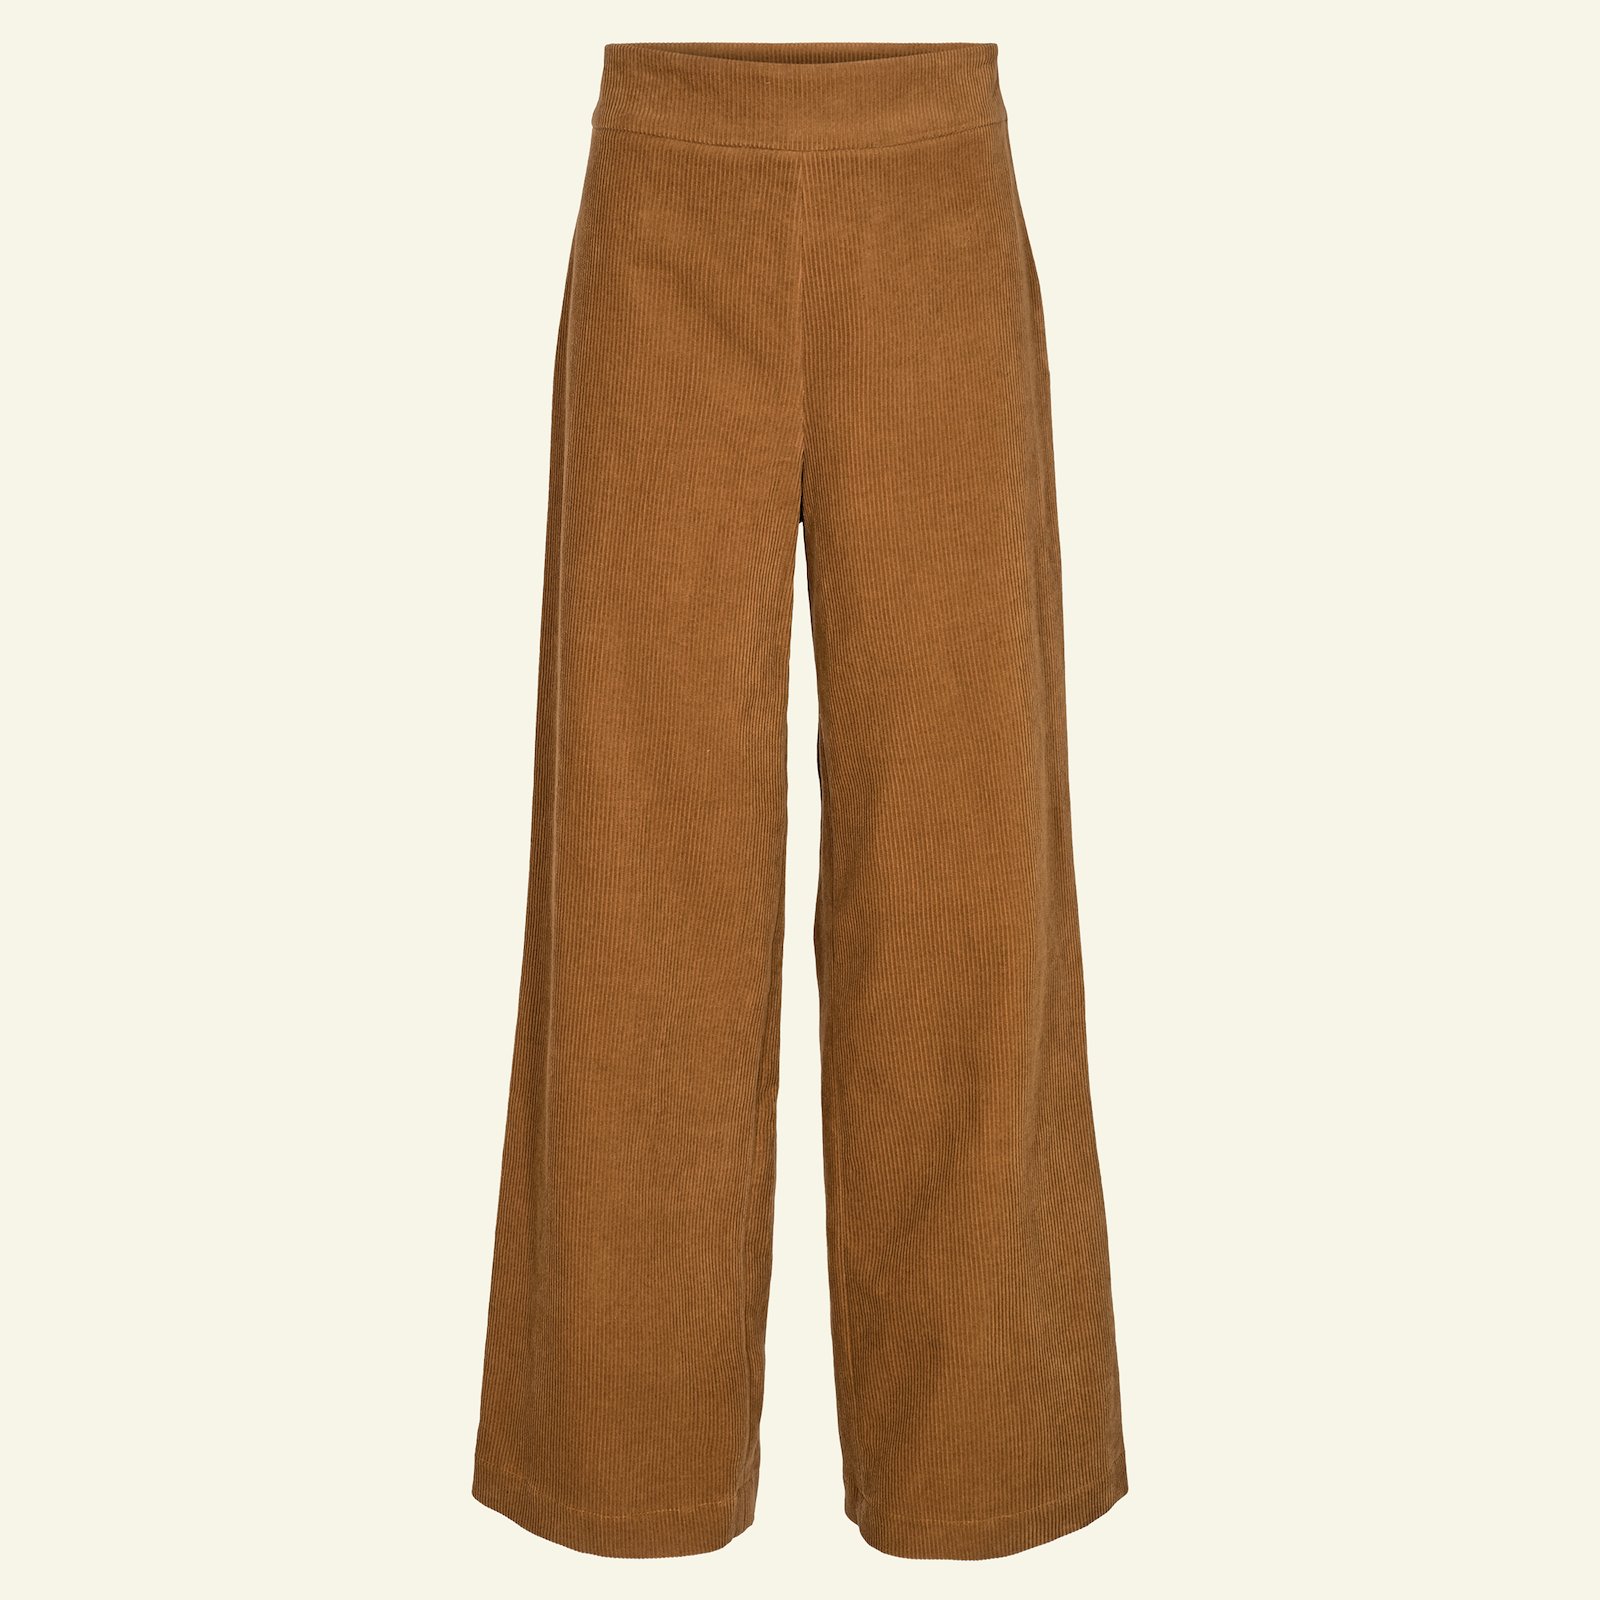 Highwaist and wide legs trousers, 38/10 p20052_430810_sskit